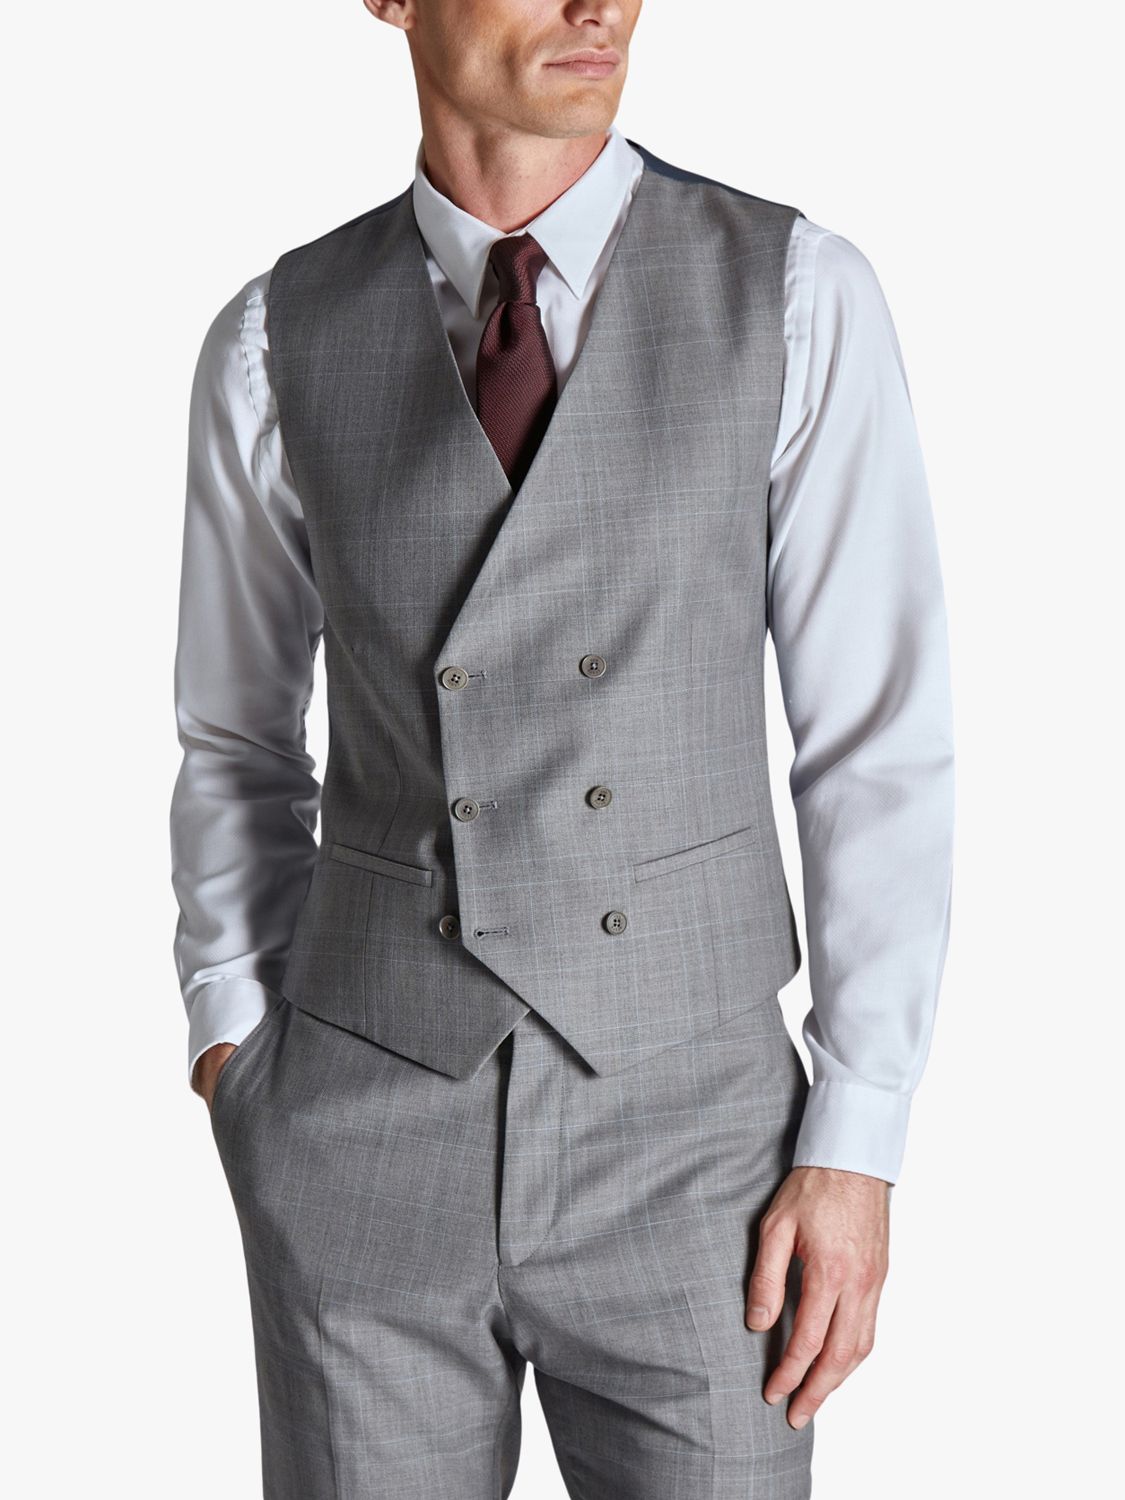 Ted Baker Soft Check Wool Blend Slim Fit Waistcoat, Grey, 38R